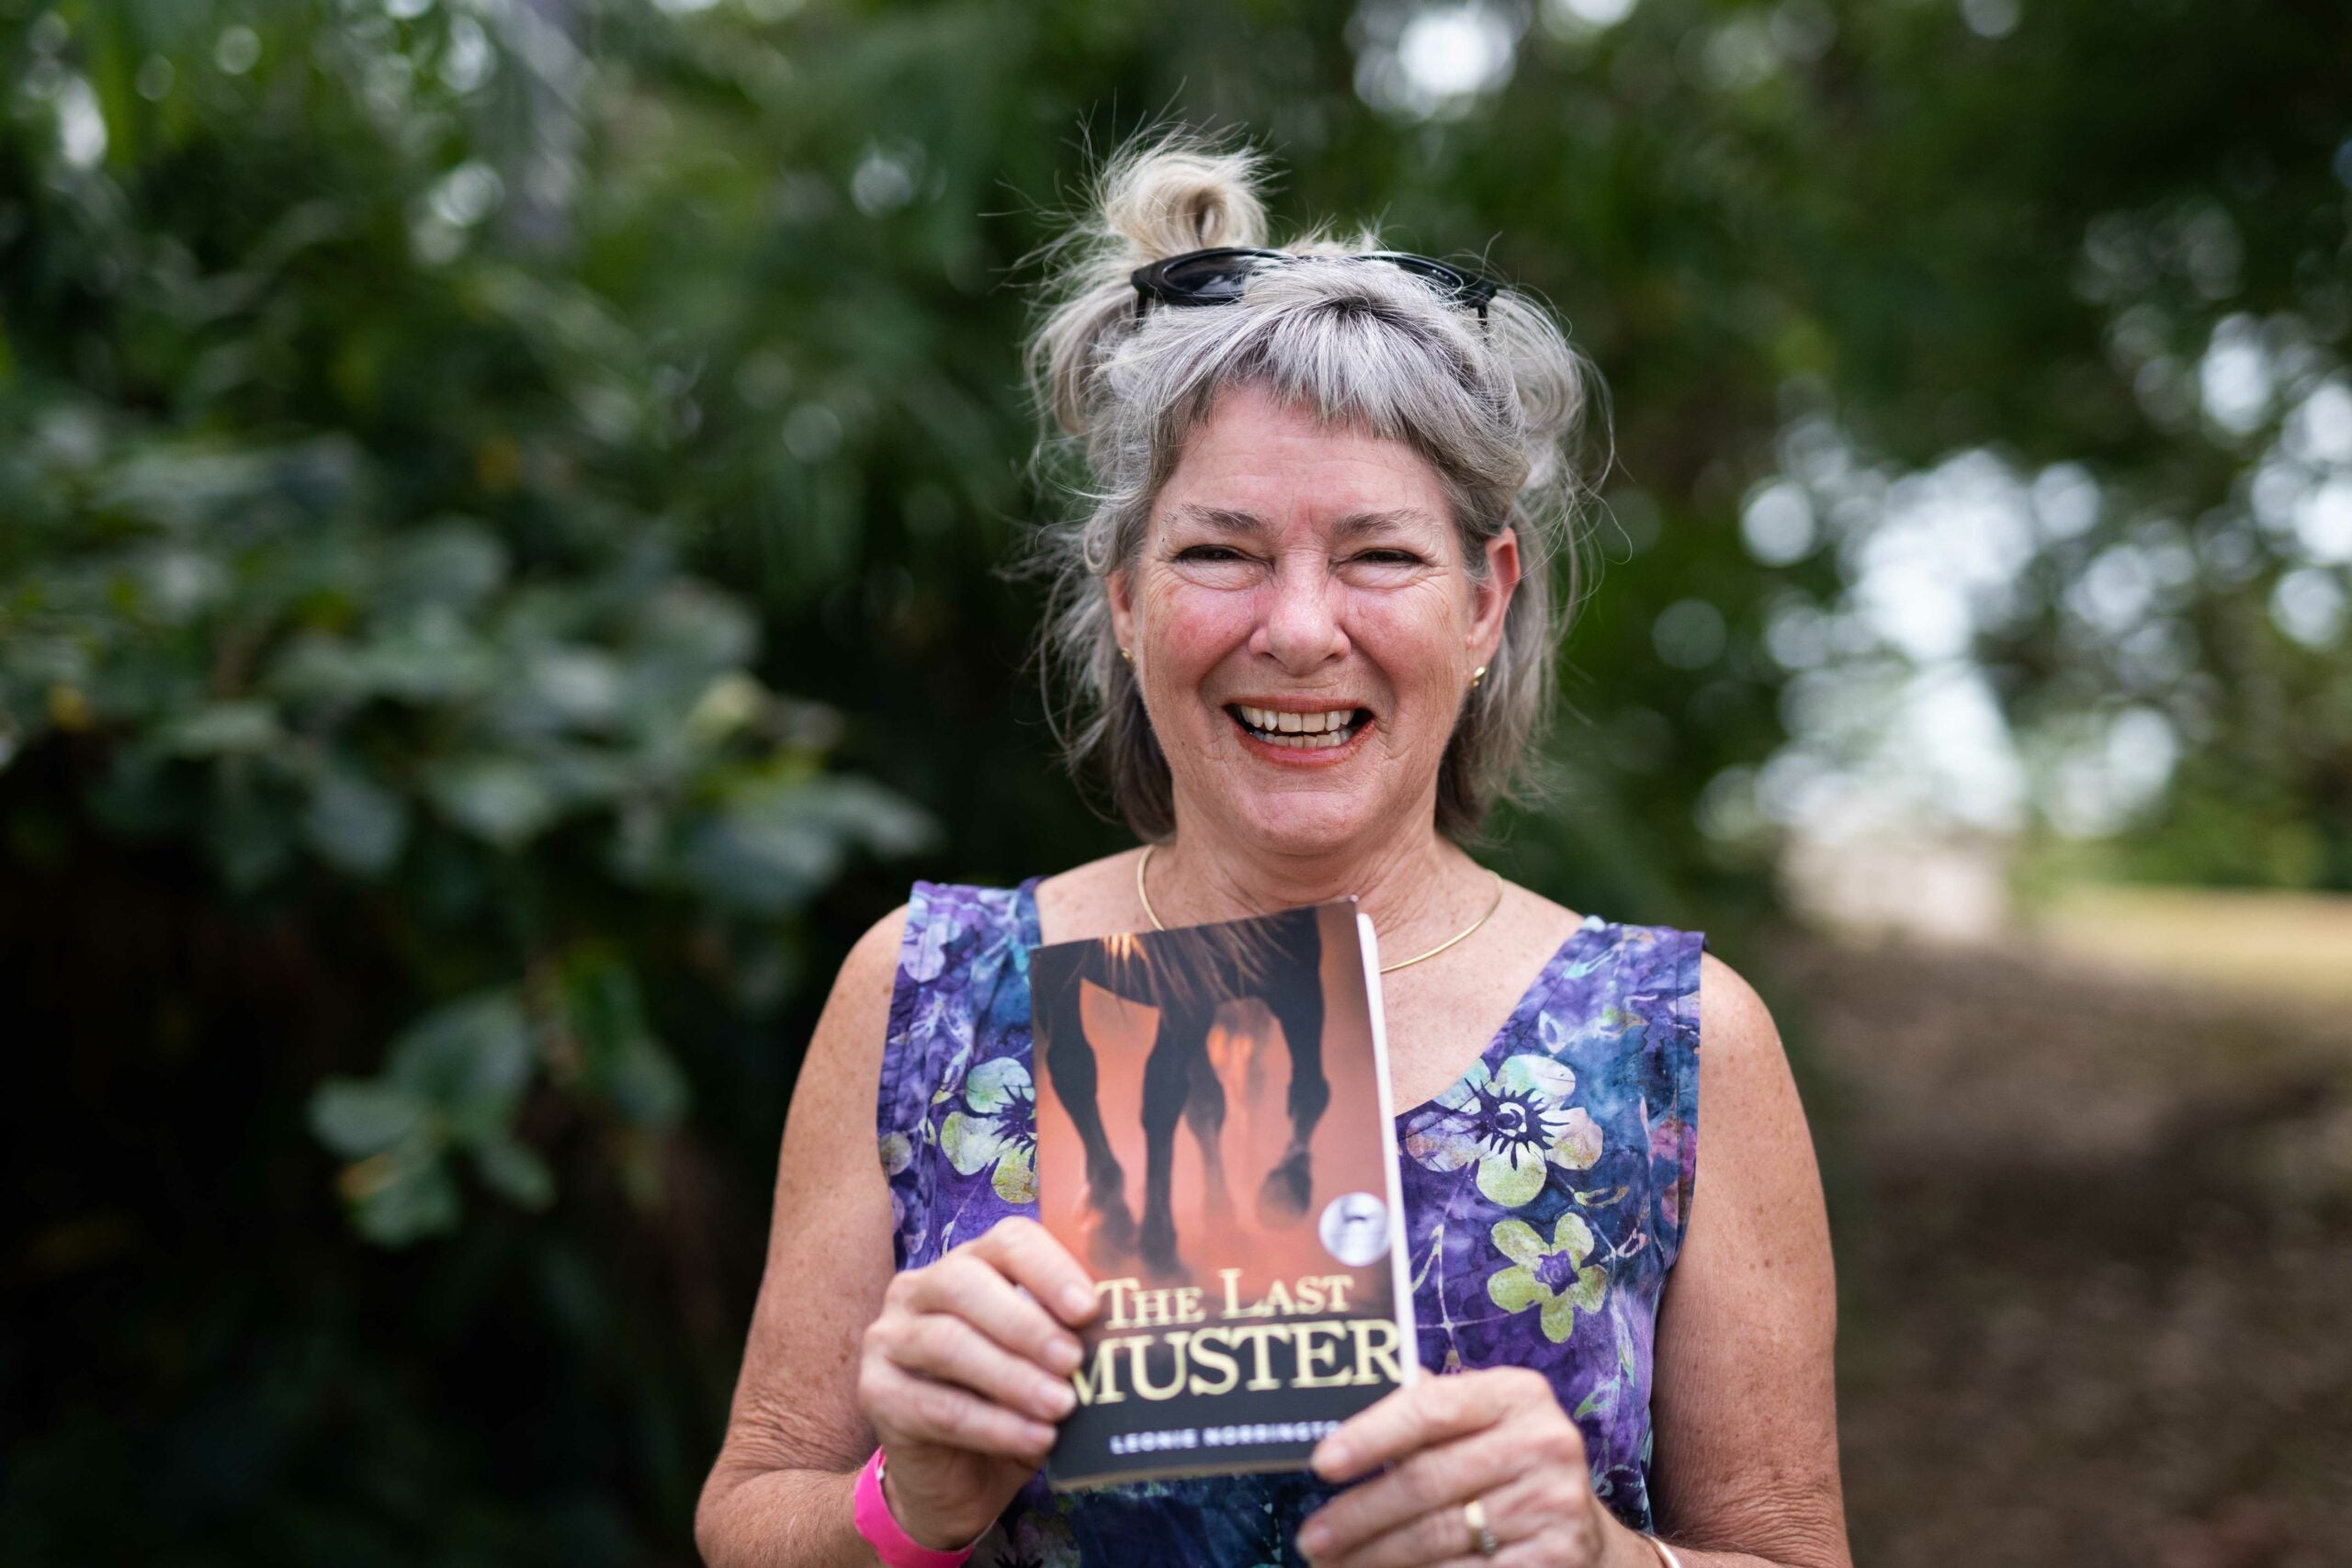 The Last Muster by Leonie Norrington - Book Launch, Saturday 28 August 2021 at 1pm